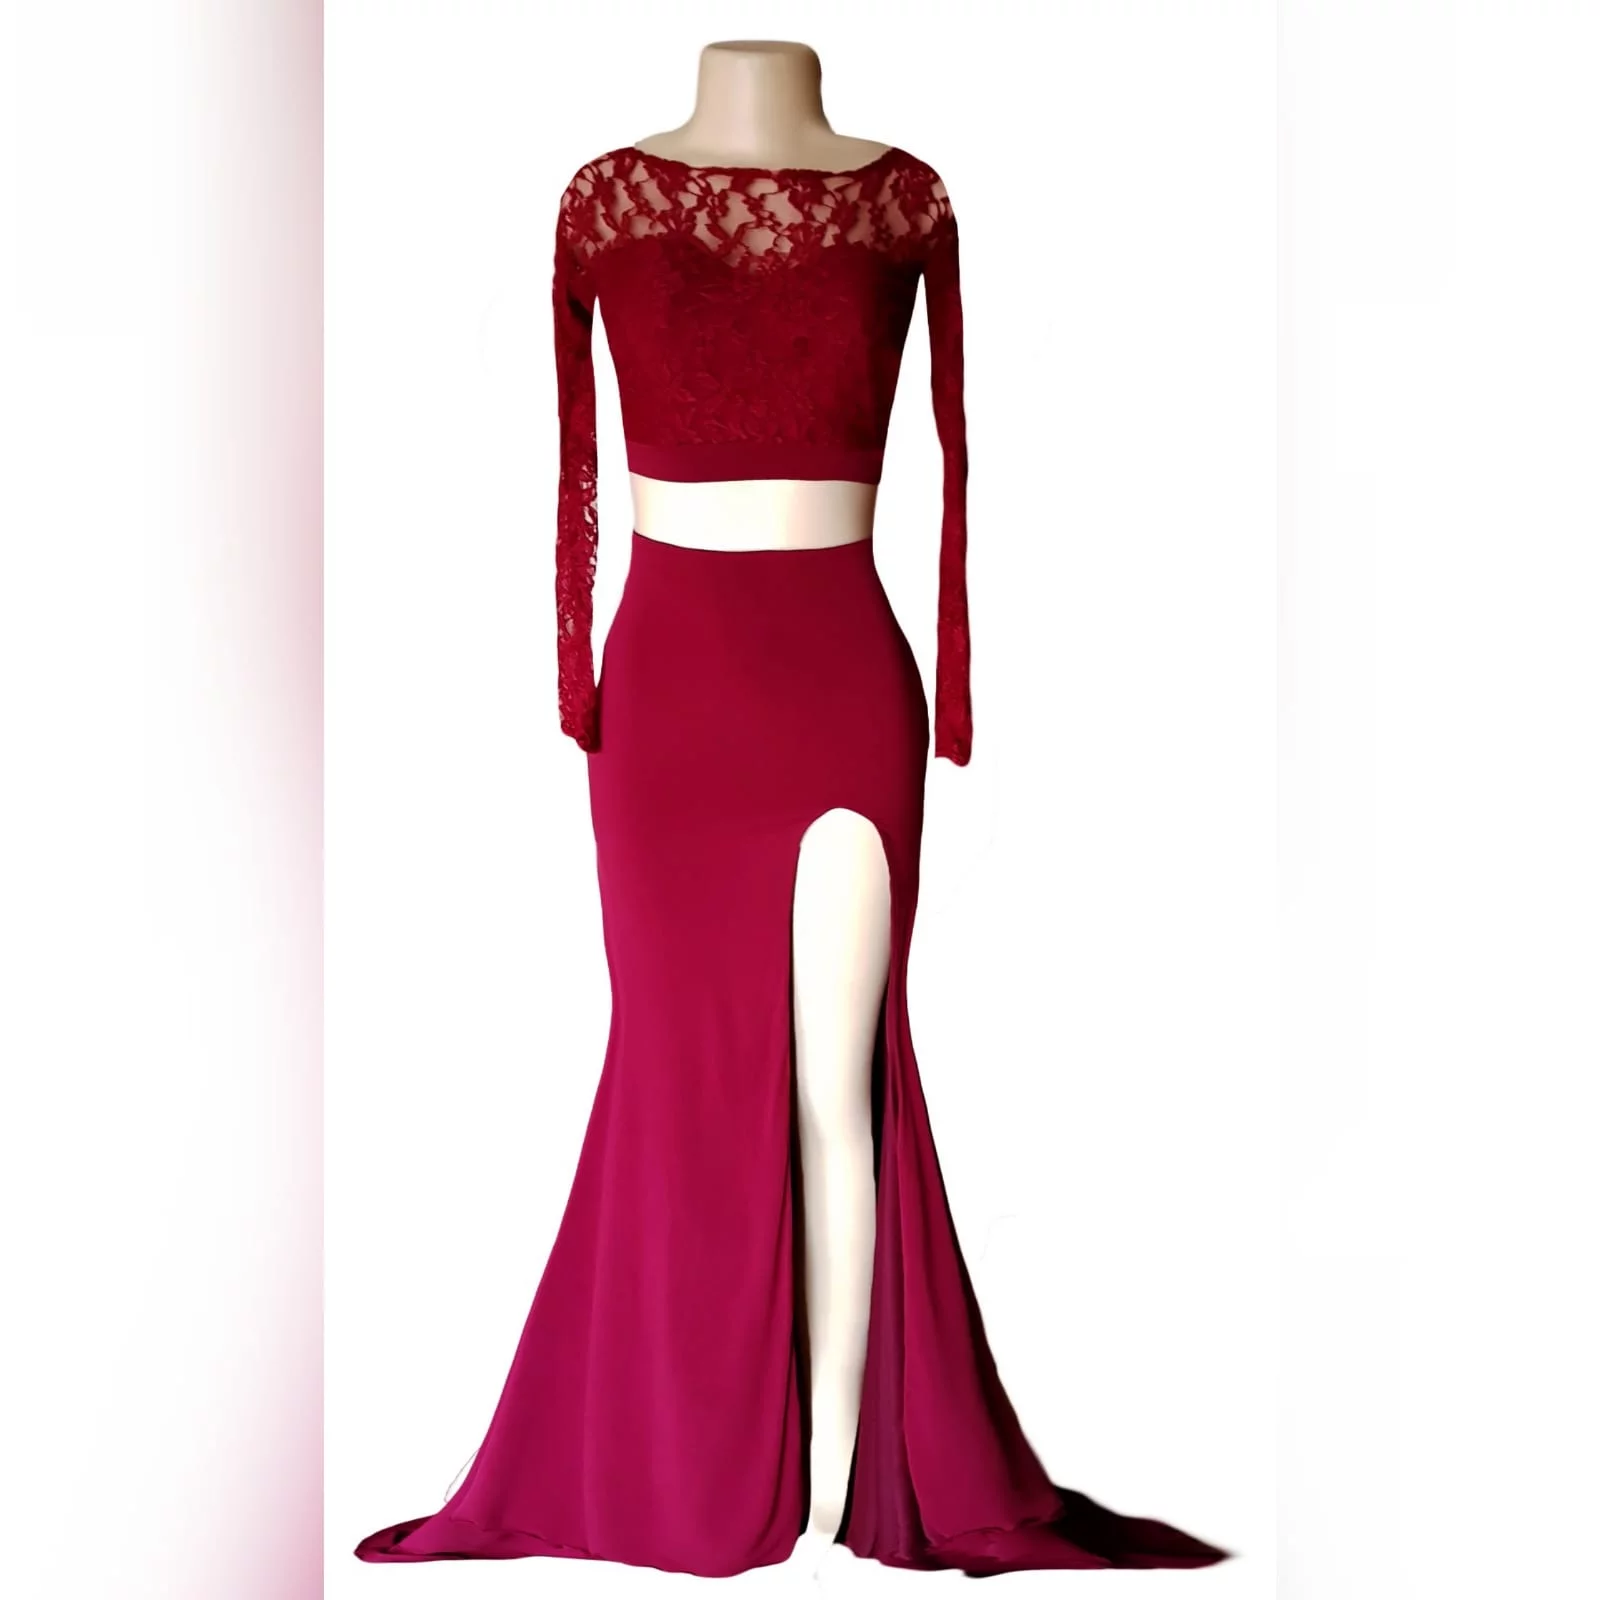 Red long sheer lace bodice matric dance dress 7 red long sheer lace bodice matric dance dress. Long off the shoulder lace sleeves with a rounded open back, slit and train.